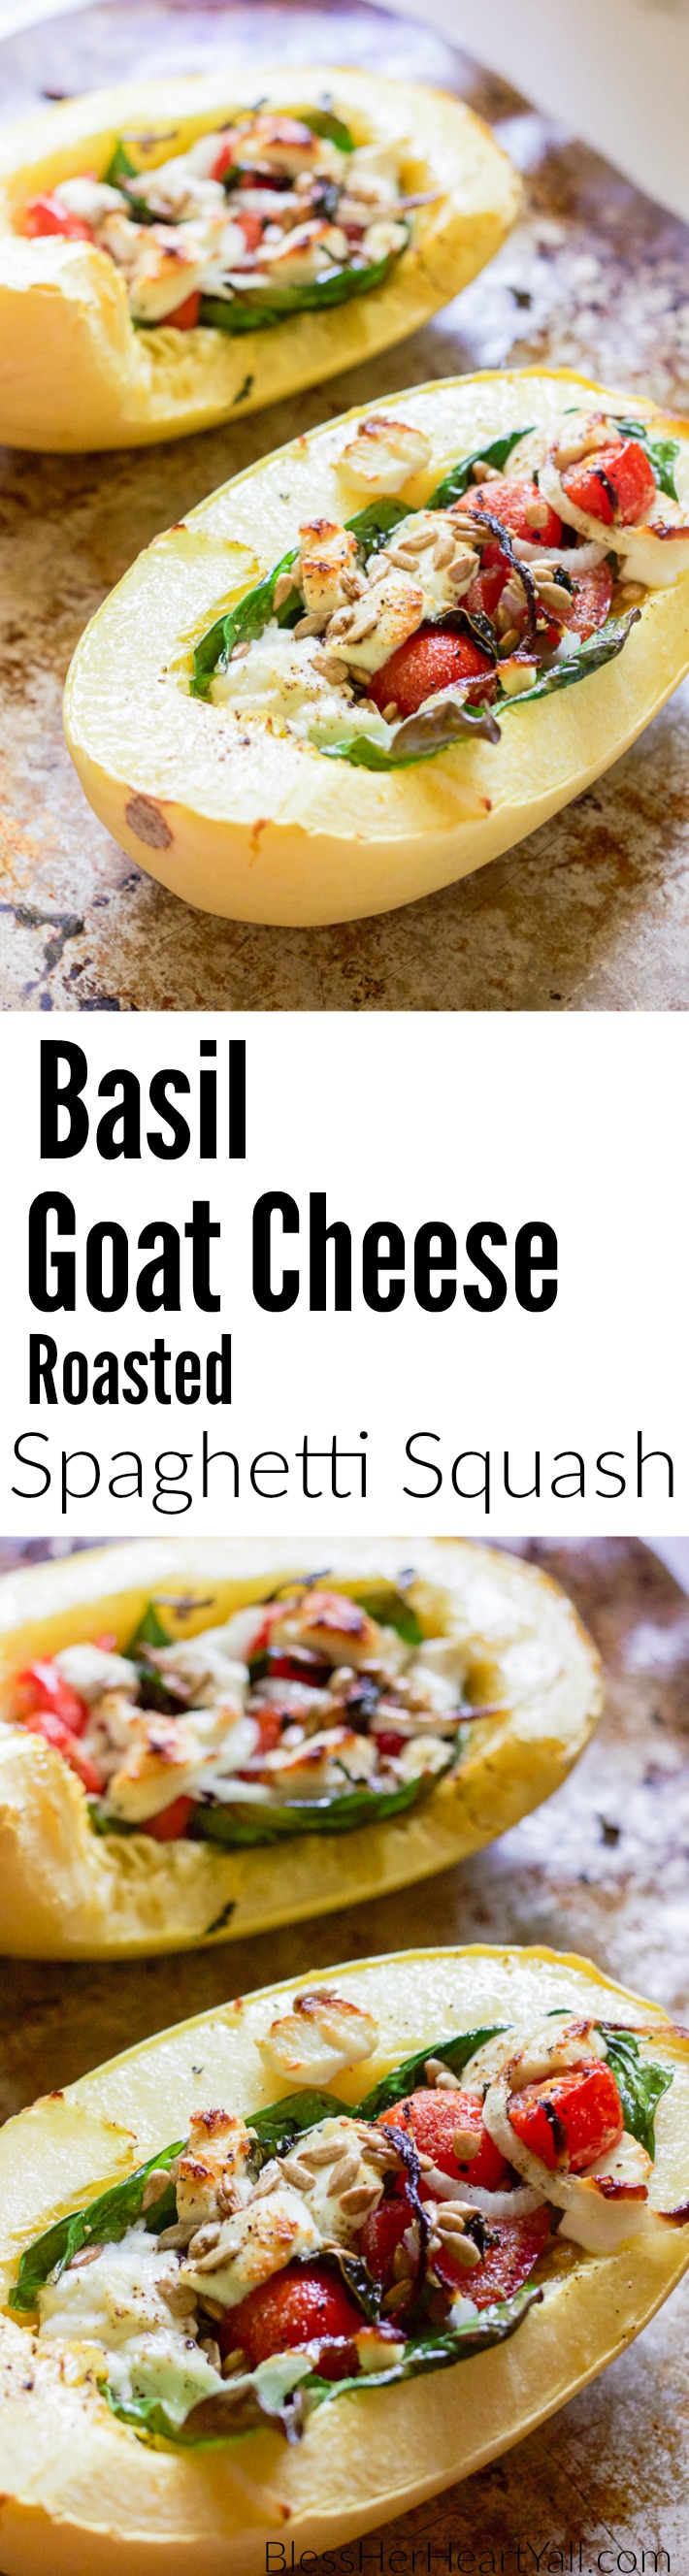 This basil goat cheese spaghetti squash combines creamy goat cheese, fresh basil and grape tomatoes, and of course a bit of garlic into this amazing and fresh dish that's just perfect if you are looking for something light, cheesy, and delicious!